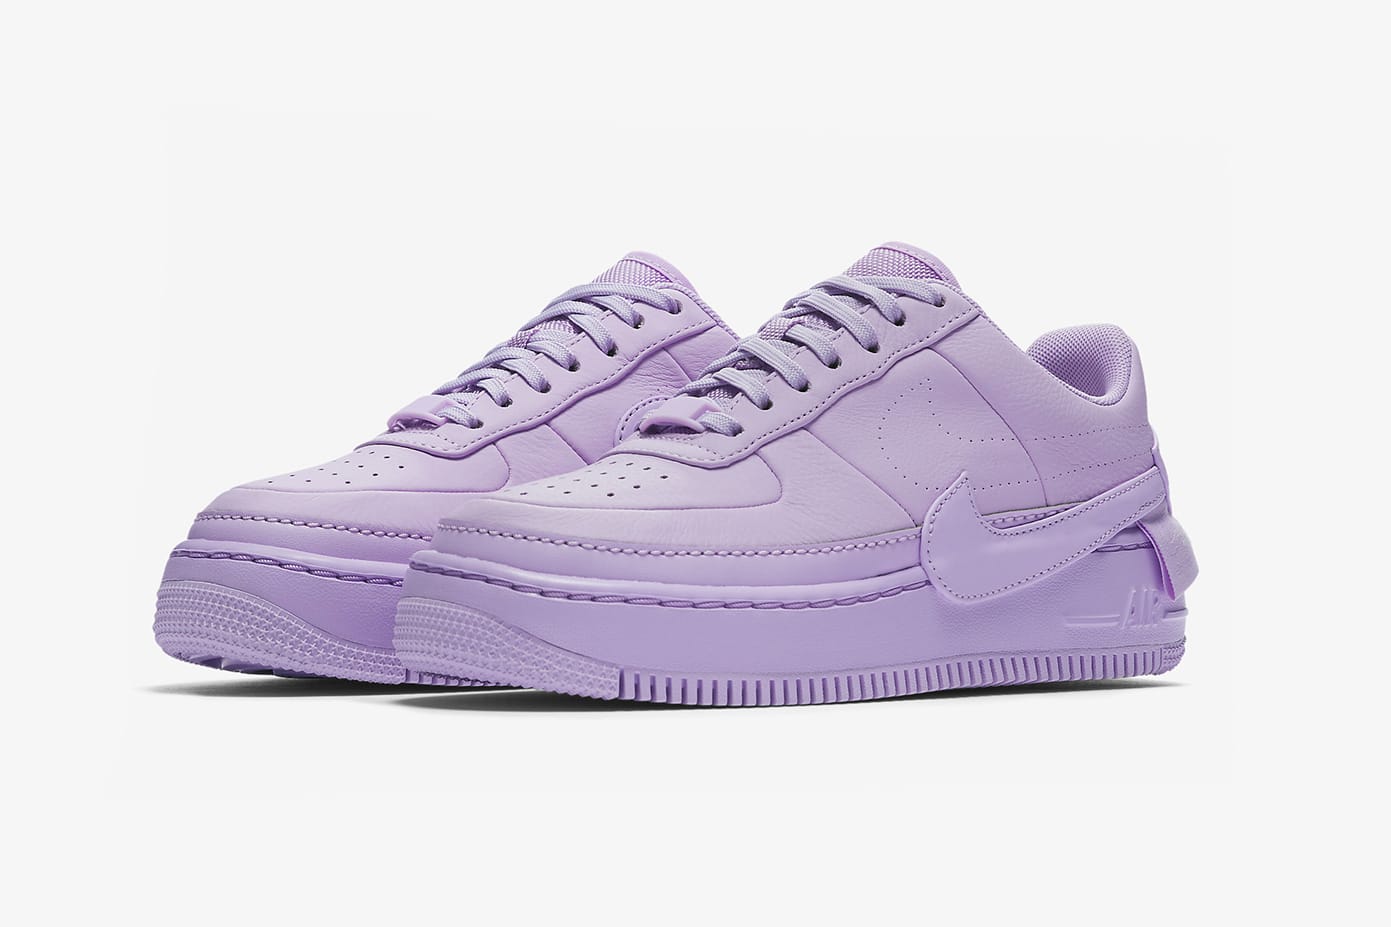 Nike Air Force 1 Low JESTER XX in 